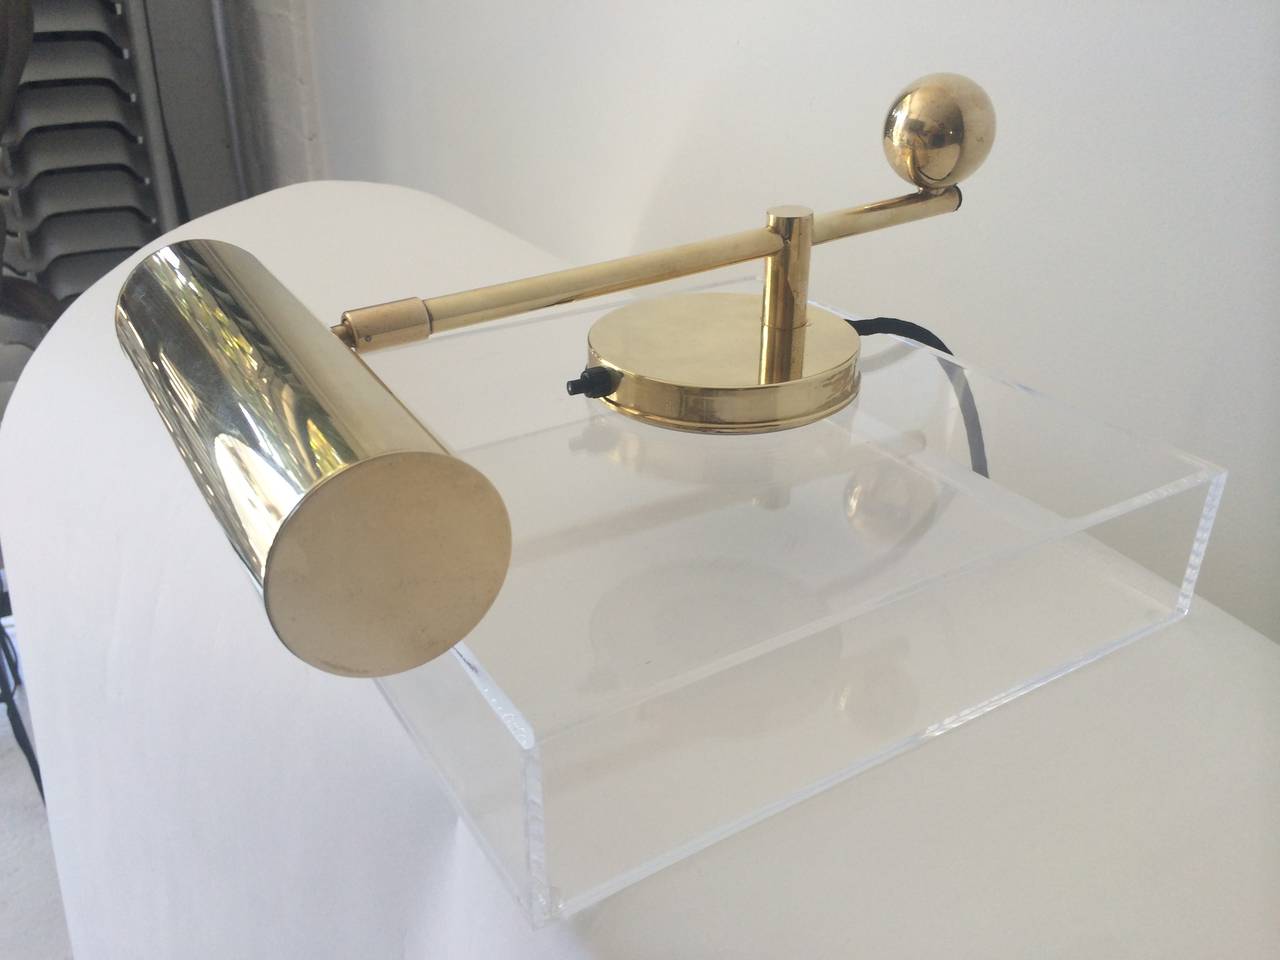 Wonderful and unique lamp manufactured by
W. H. Gispen in Netherlands, 1928.  Plated brass and plated nickel. The acrylic base is 11.5 inches square x 2.75 inches high.